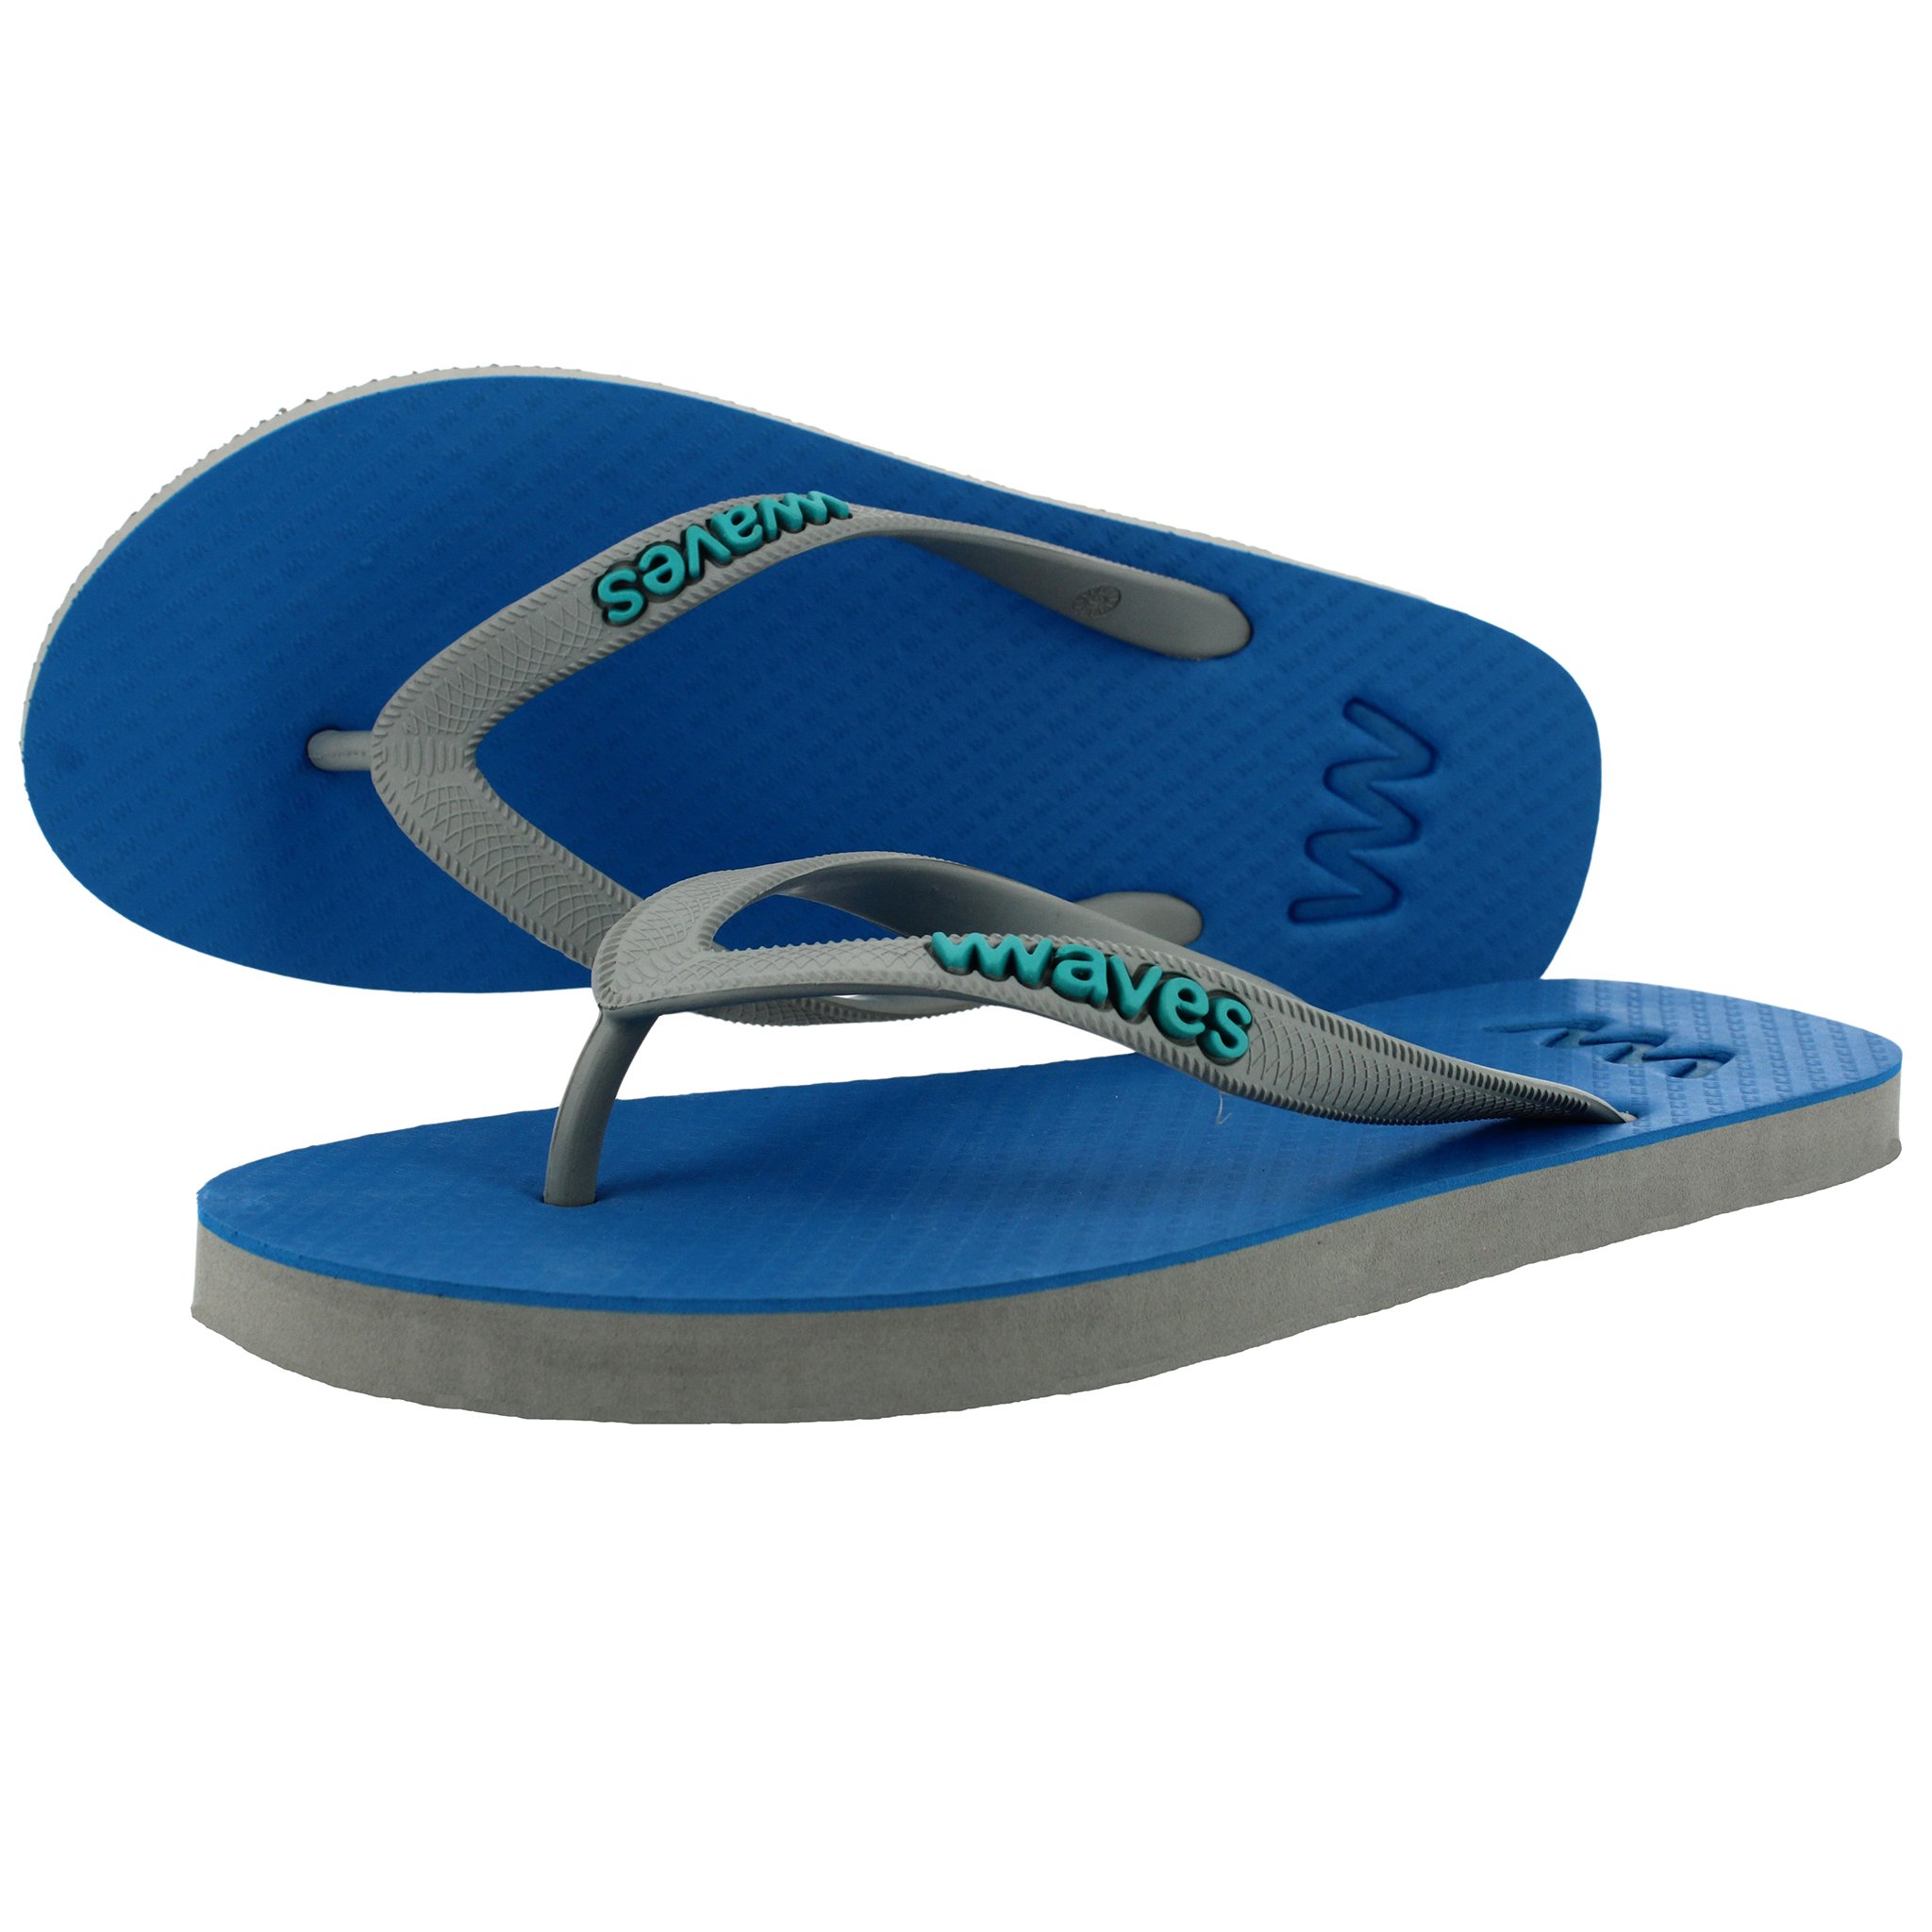 100% natural rubber flip flop – blue with grey sole - 5